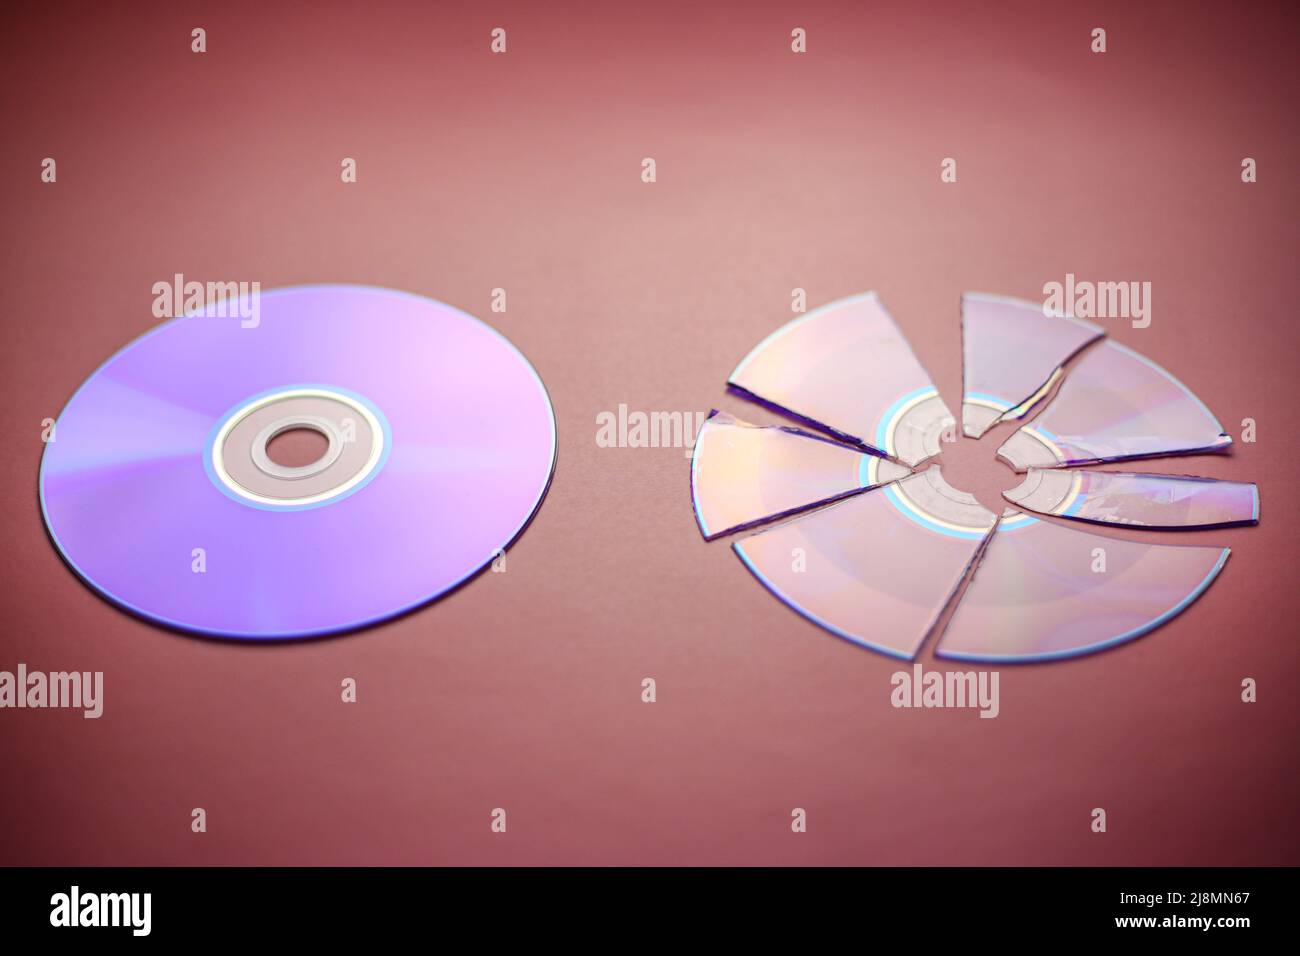 Broken compact disc divided into parts and a whole compact disc close-up on a red-burgundy background, complete loss of data Stock Photo